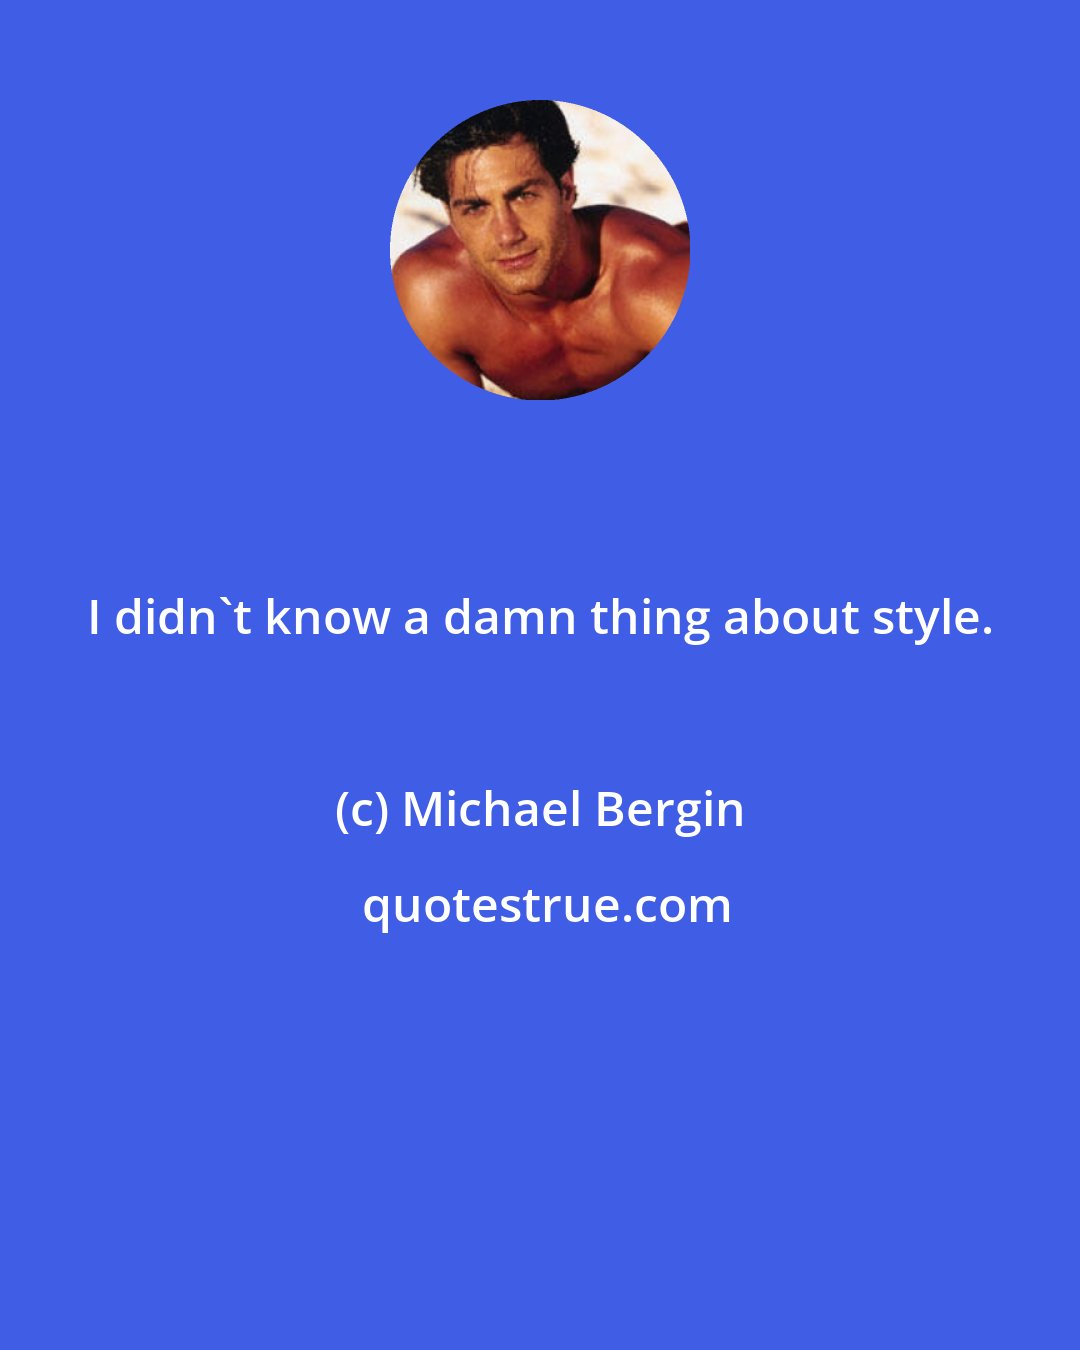 Michael Bergin: I didn't know a damn thing about style.